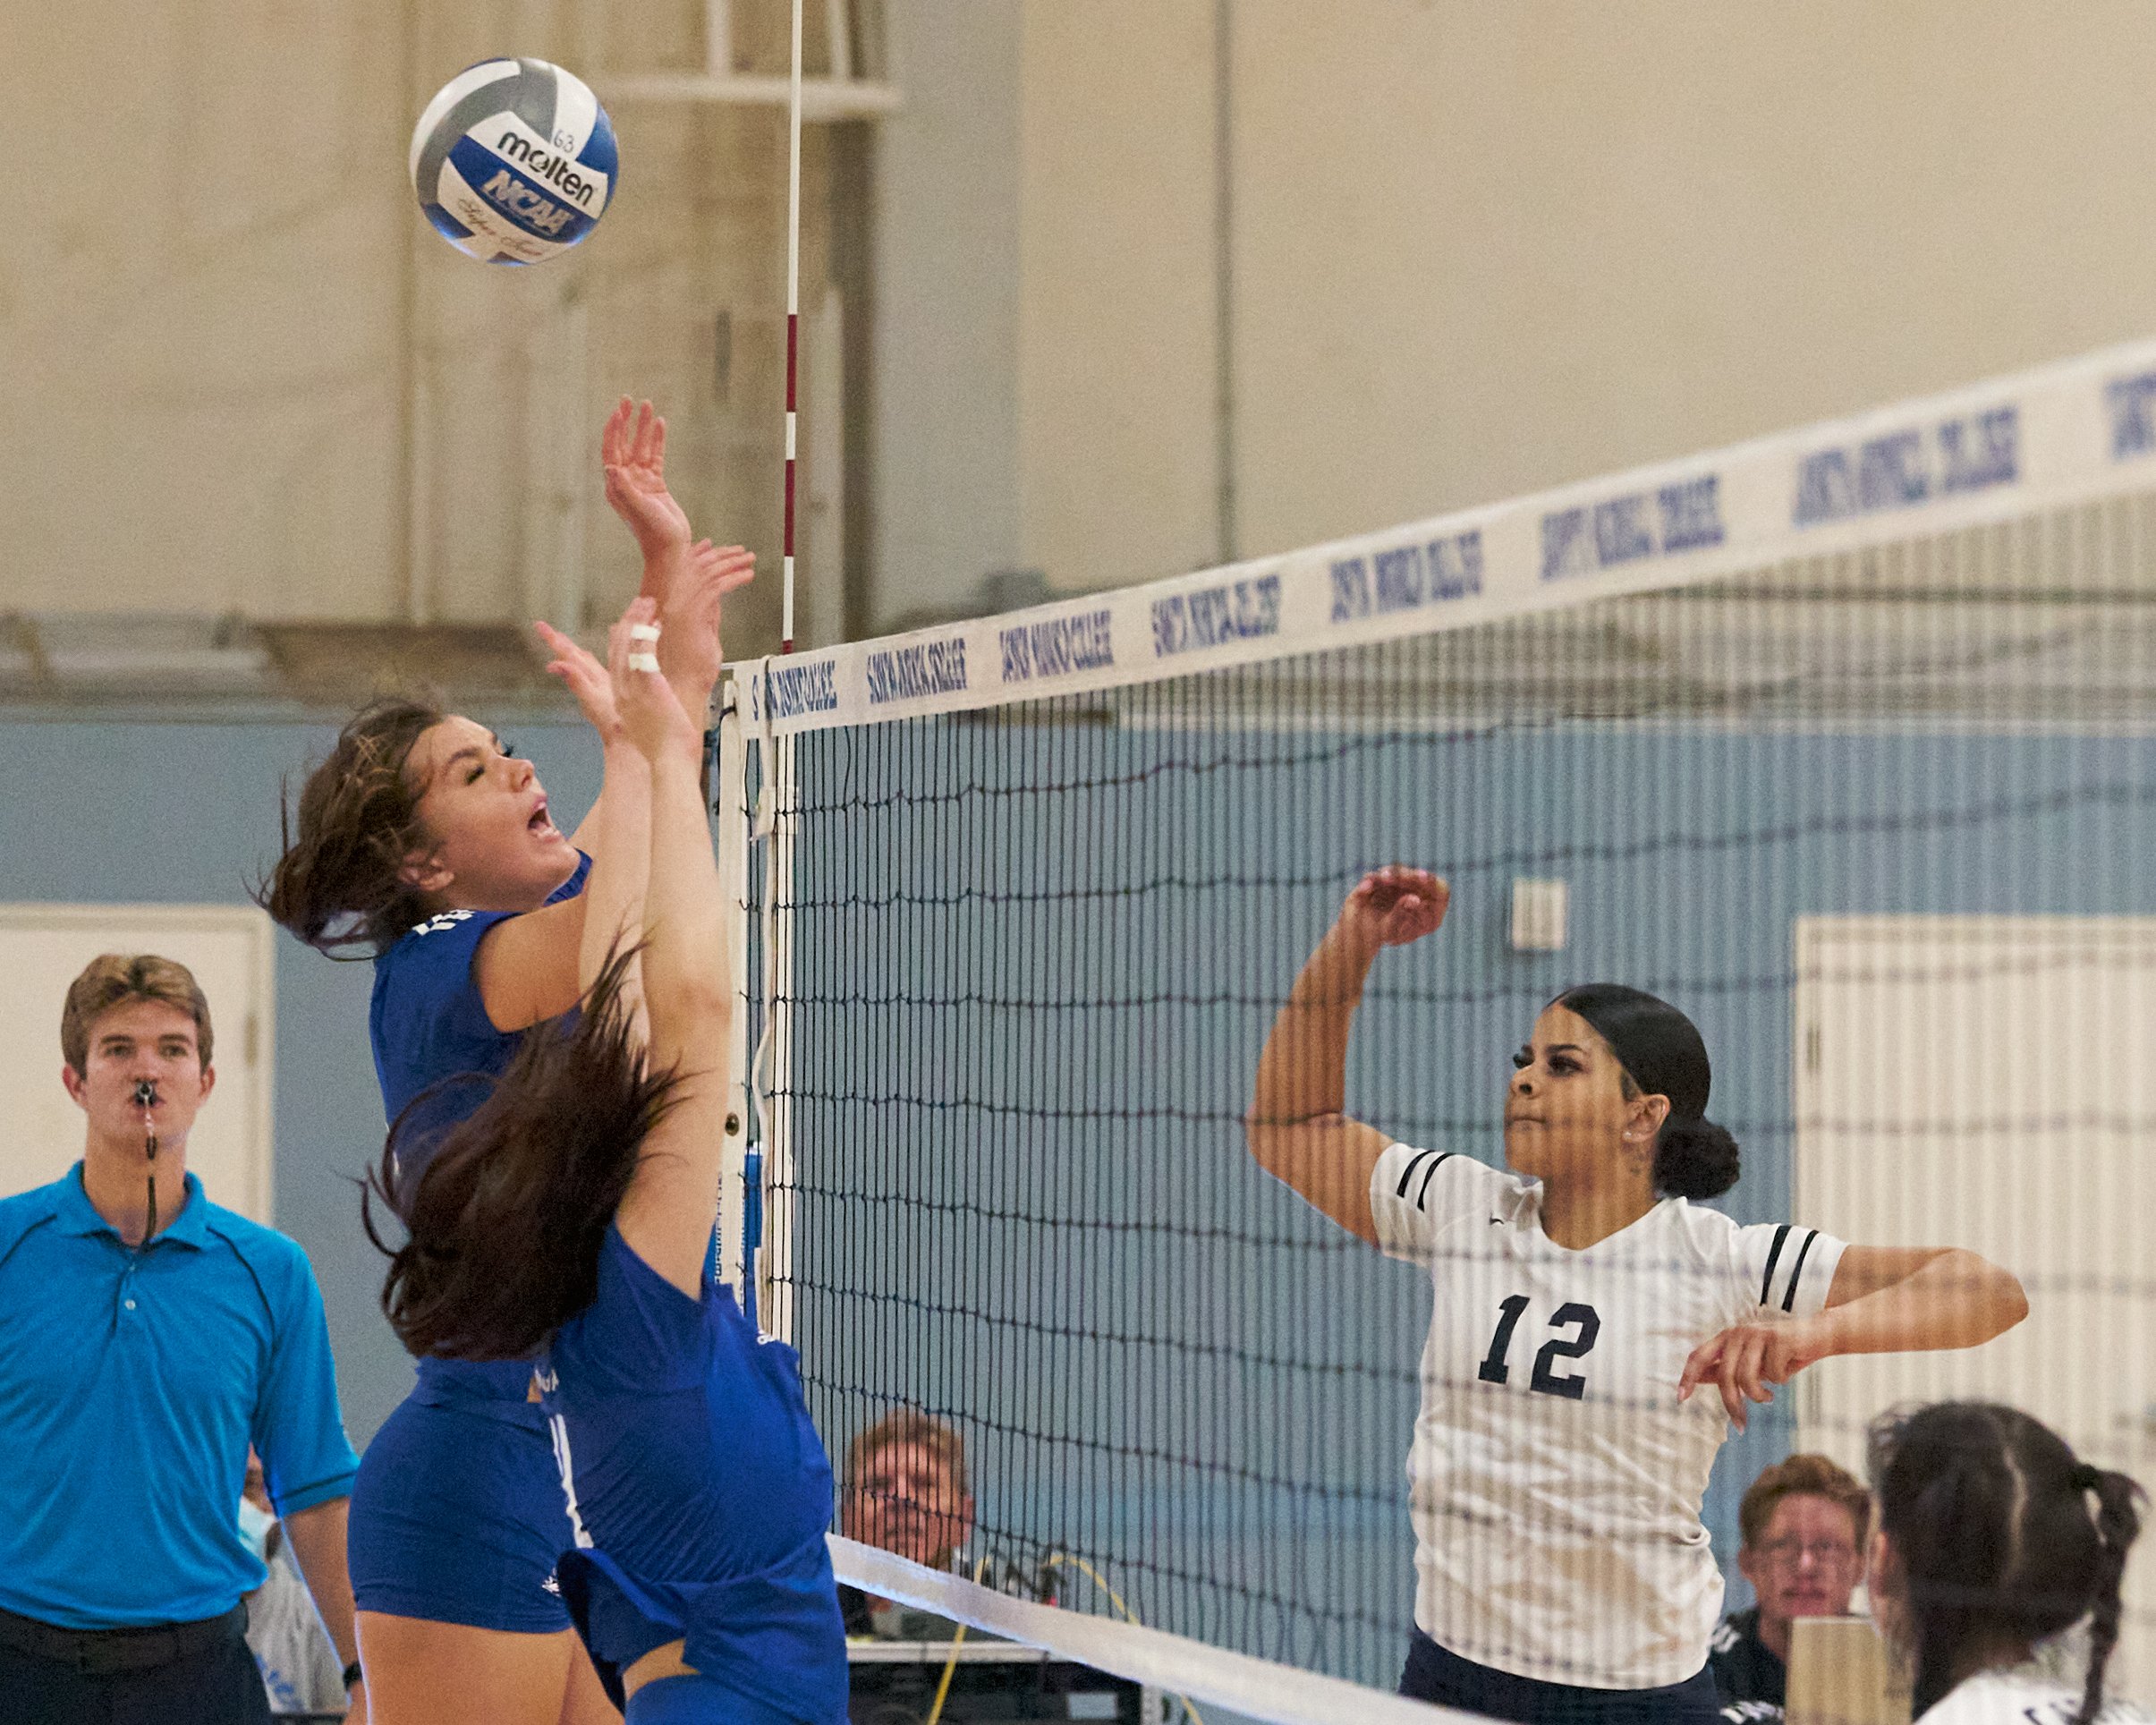  College of the Canyons Cougars' Kaelyn White (right) hits the ball past Santa Monica College Corsairs' Mackenzie Wolff (left) and Maiella Riva during the women's volleyball match on Friday, Oct. 28, 2022, at SMC Gym in Santa Monica, Calif. The Corsa